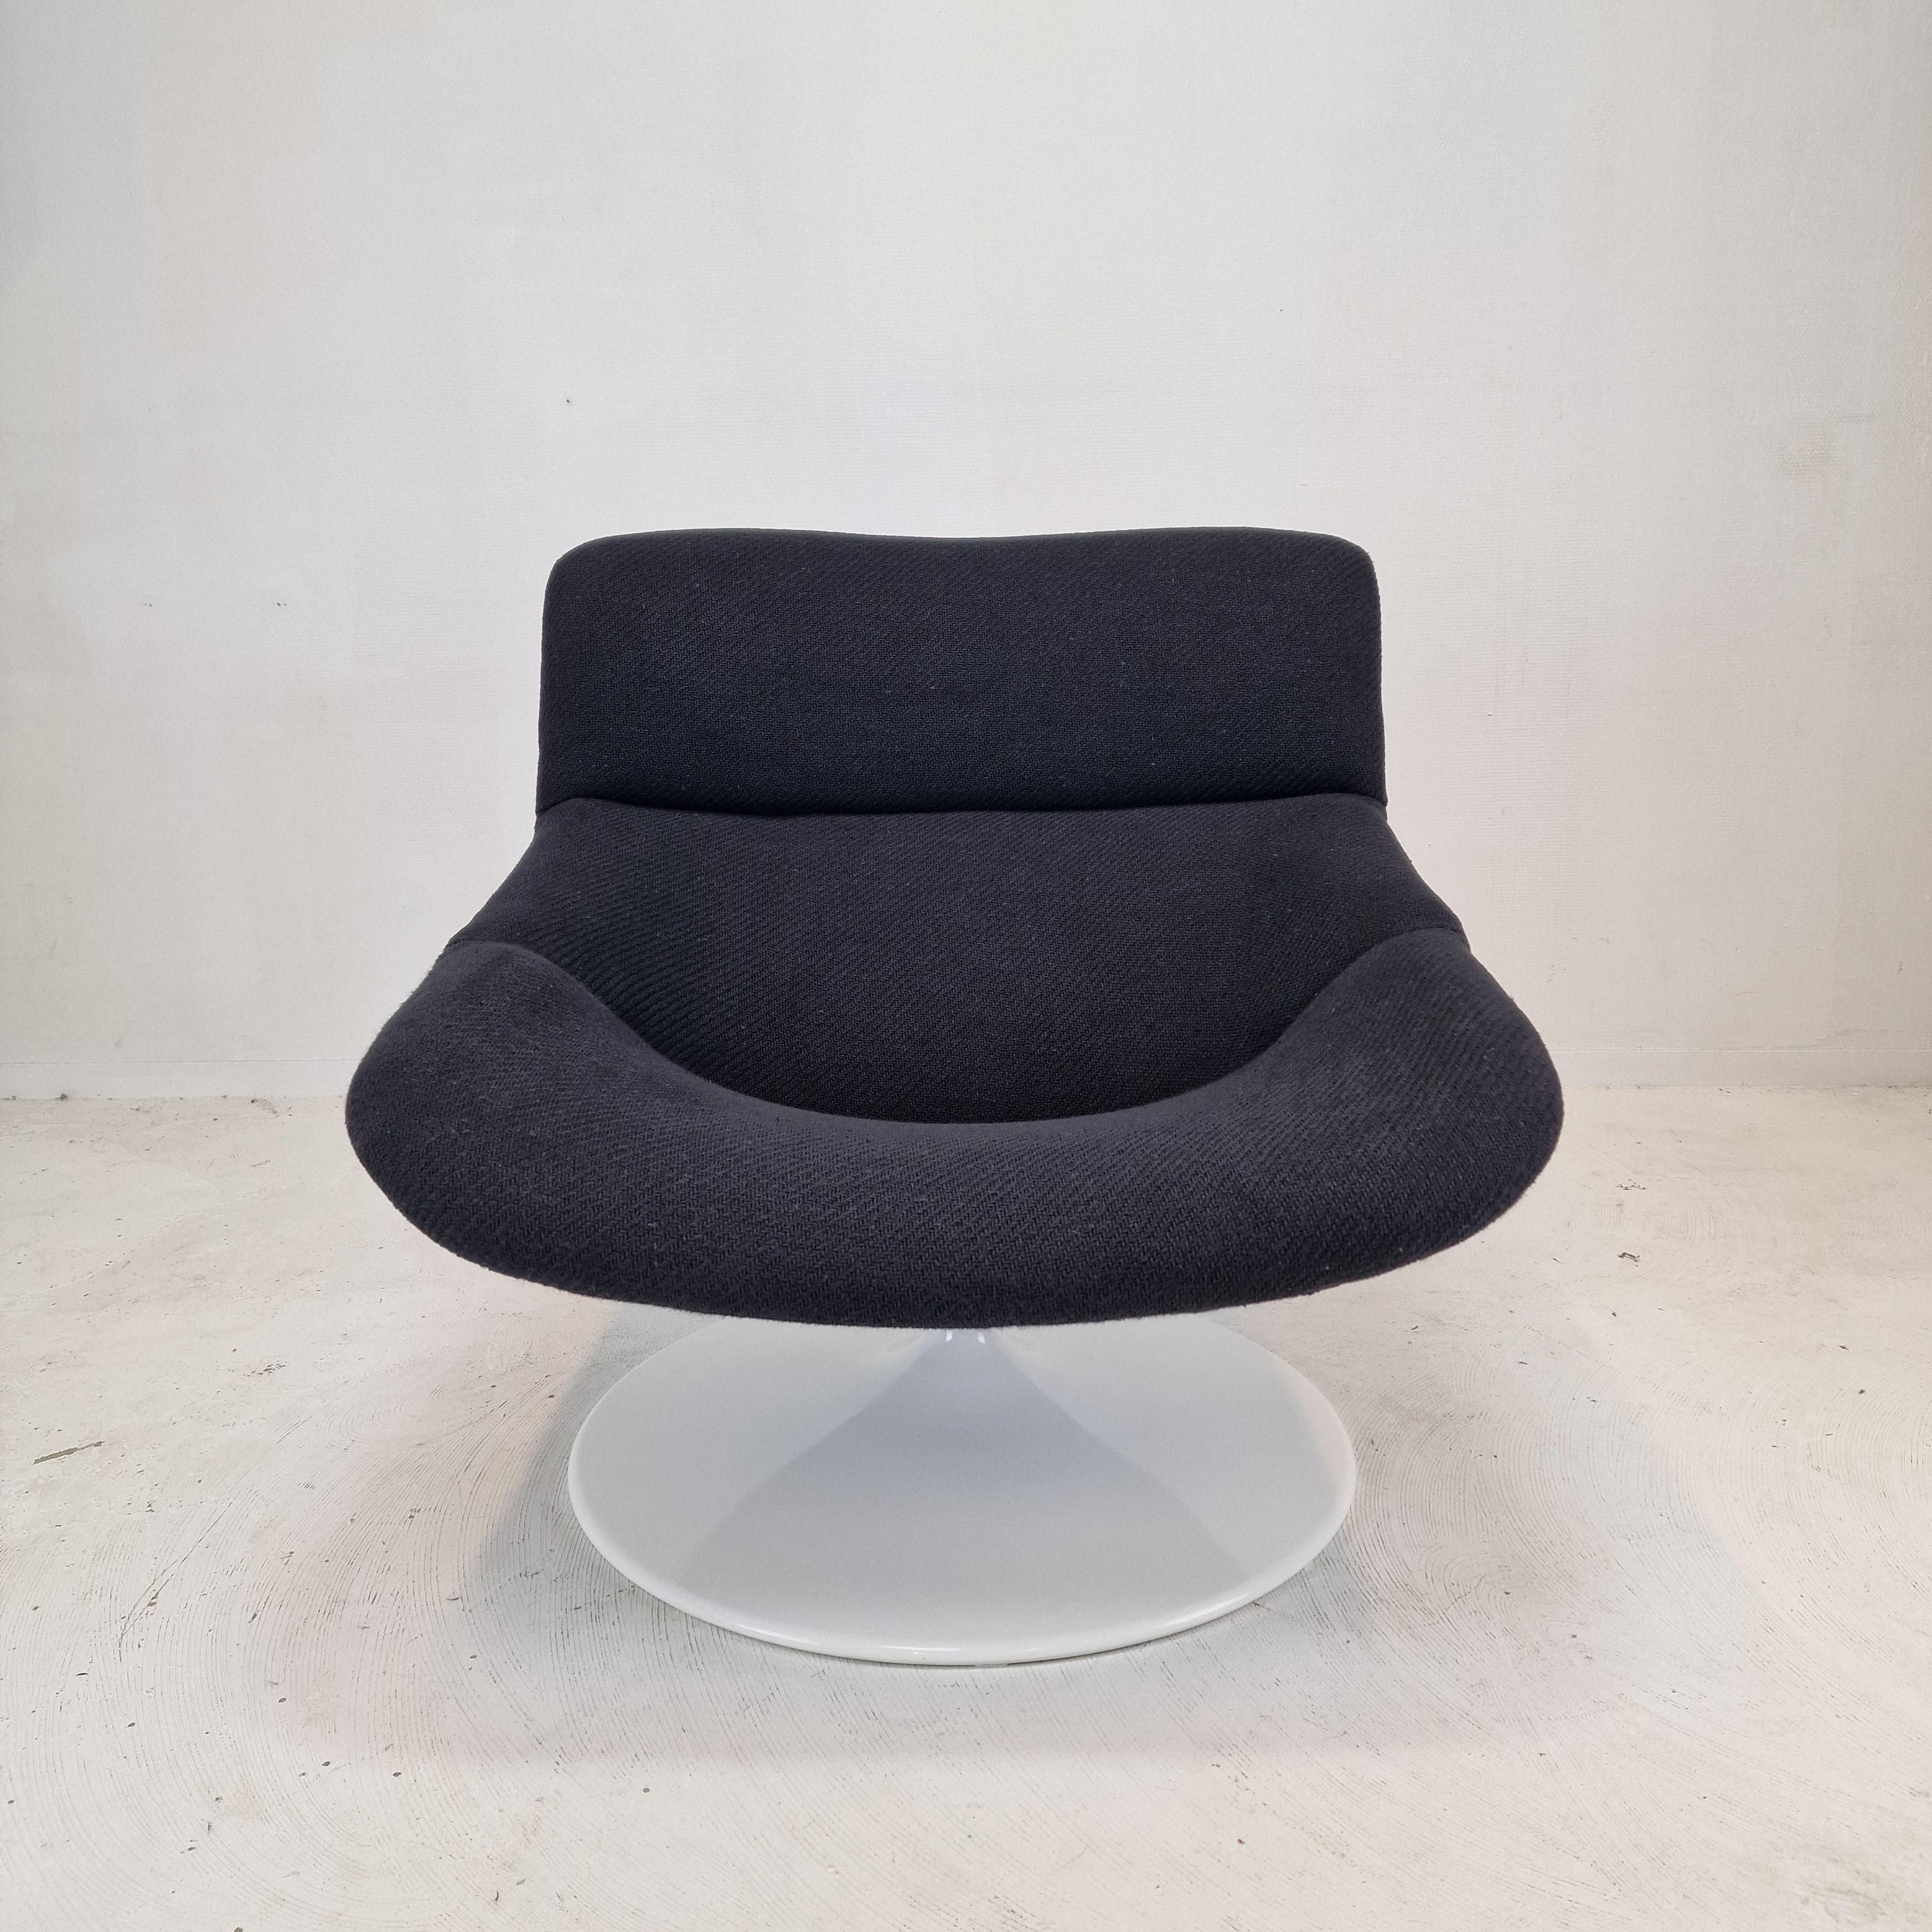 Extremely comfortable Artifort F518 lounge chair. 
Designed by the famous English designer Geoffrey Harcourt in the 70's. 

Very solid wooden frame with a large pivoting metal foot.

The chair is just upholstered with very nice black wool fabric and